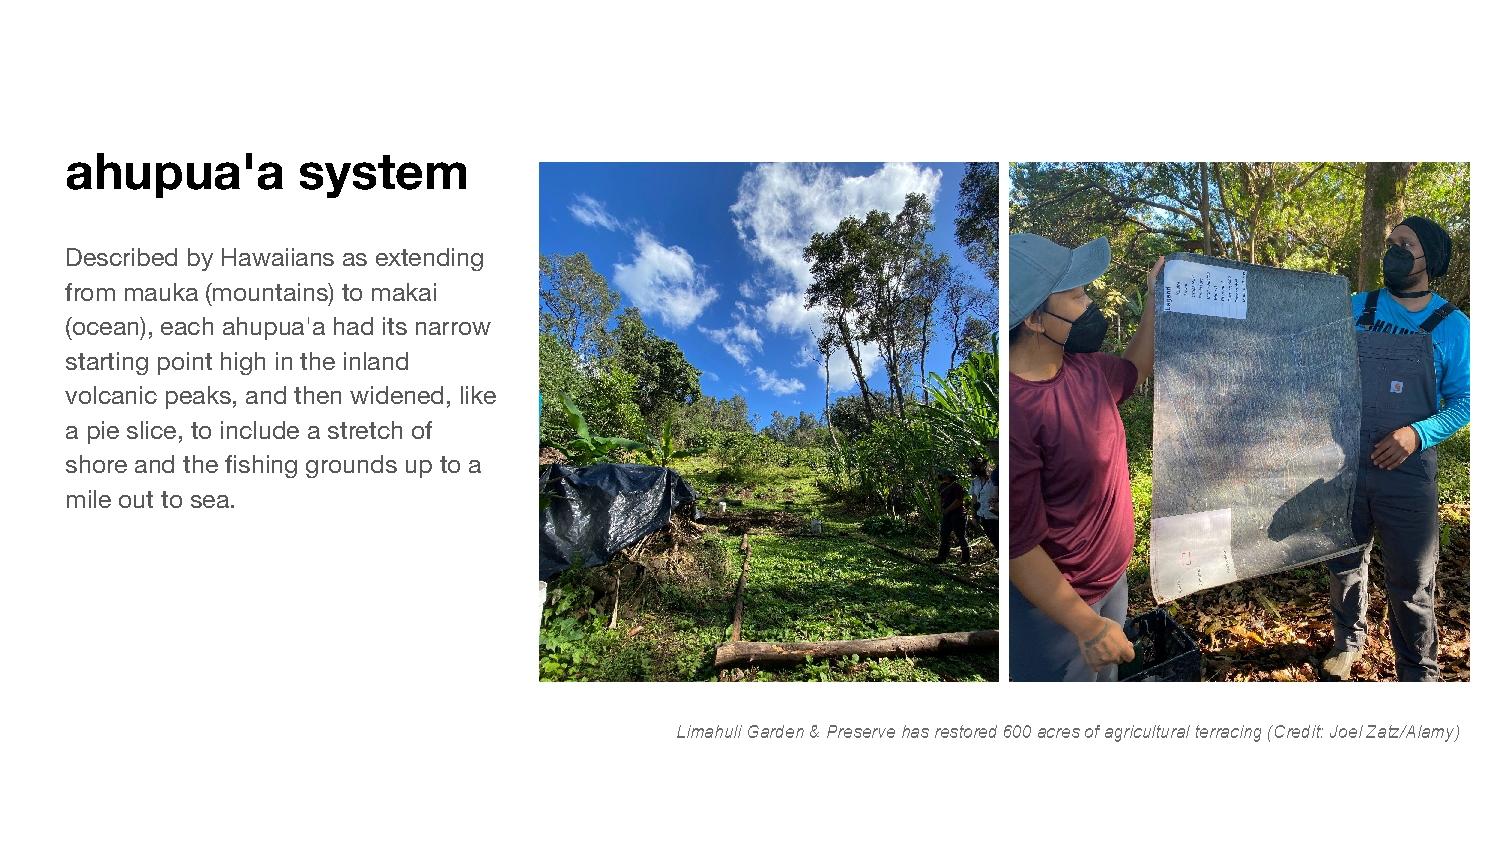 Information on Ahuapua'a System accompanied by a 2 photographs, 1 of a present day restoration of an ahupua'a landscape along the hillside and one of 2 people holding a mapping of this system. 